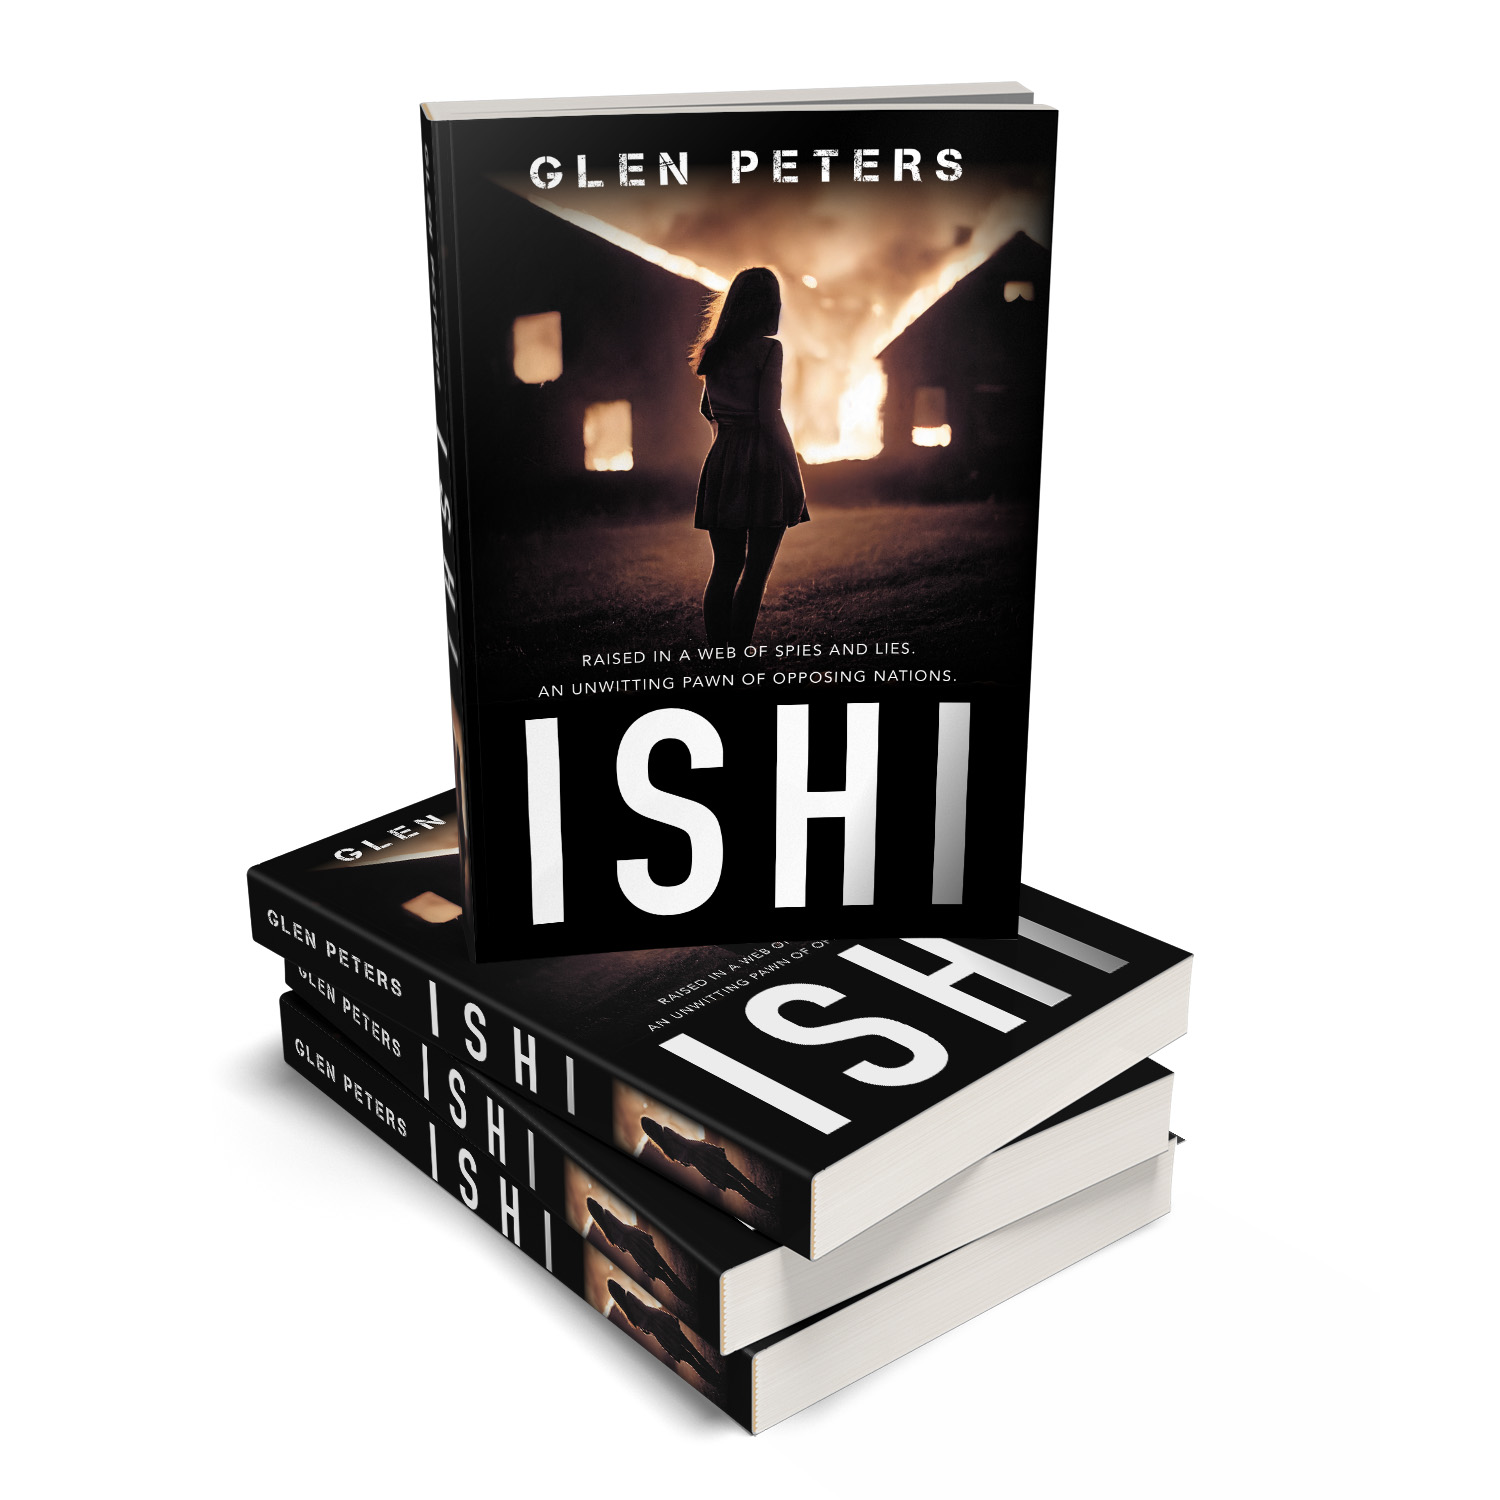 'Ishi' is a gripping modern thriller that spans from the late 1980s to the mid 2000s. The author is Glen Peters. The book cover and interior design are by Mark Thomas. To learn more about what Mark could do for your book, please visit coverness.com.